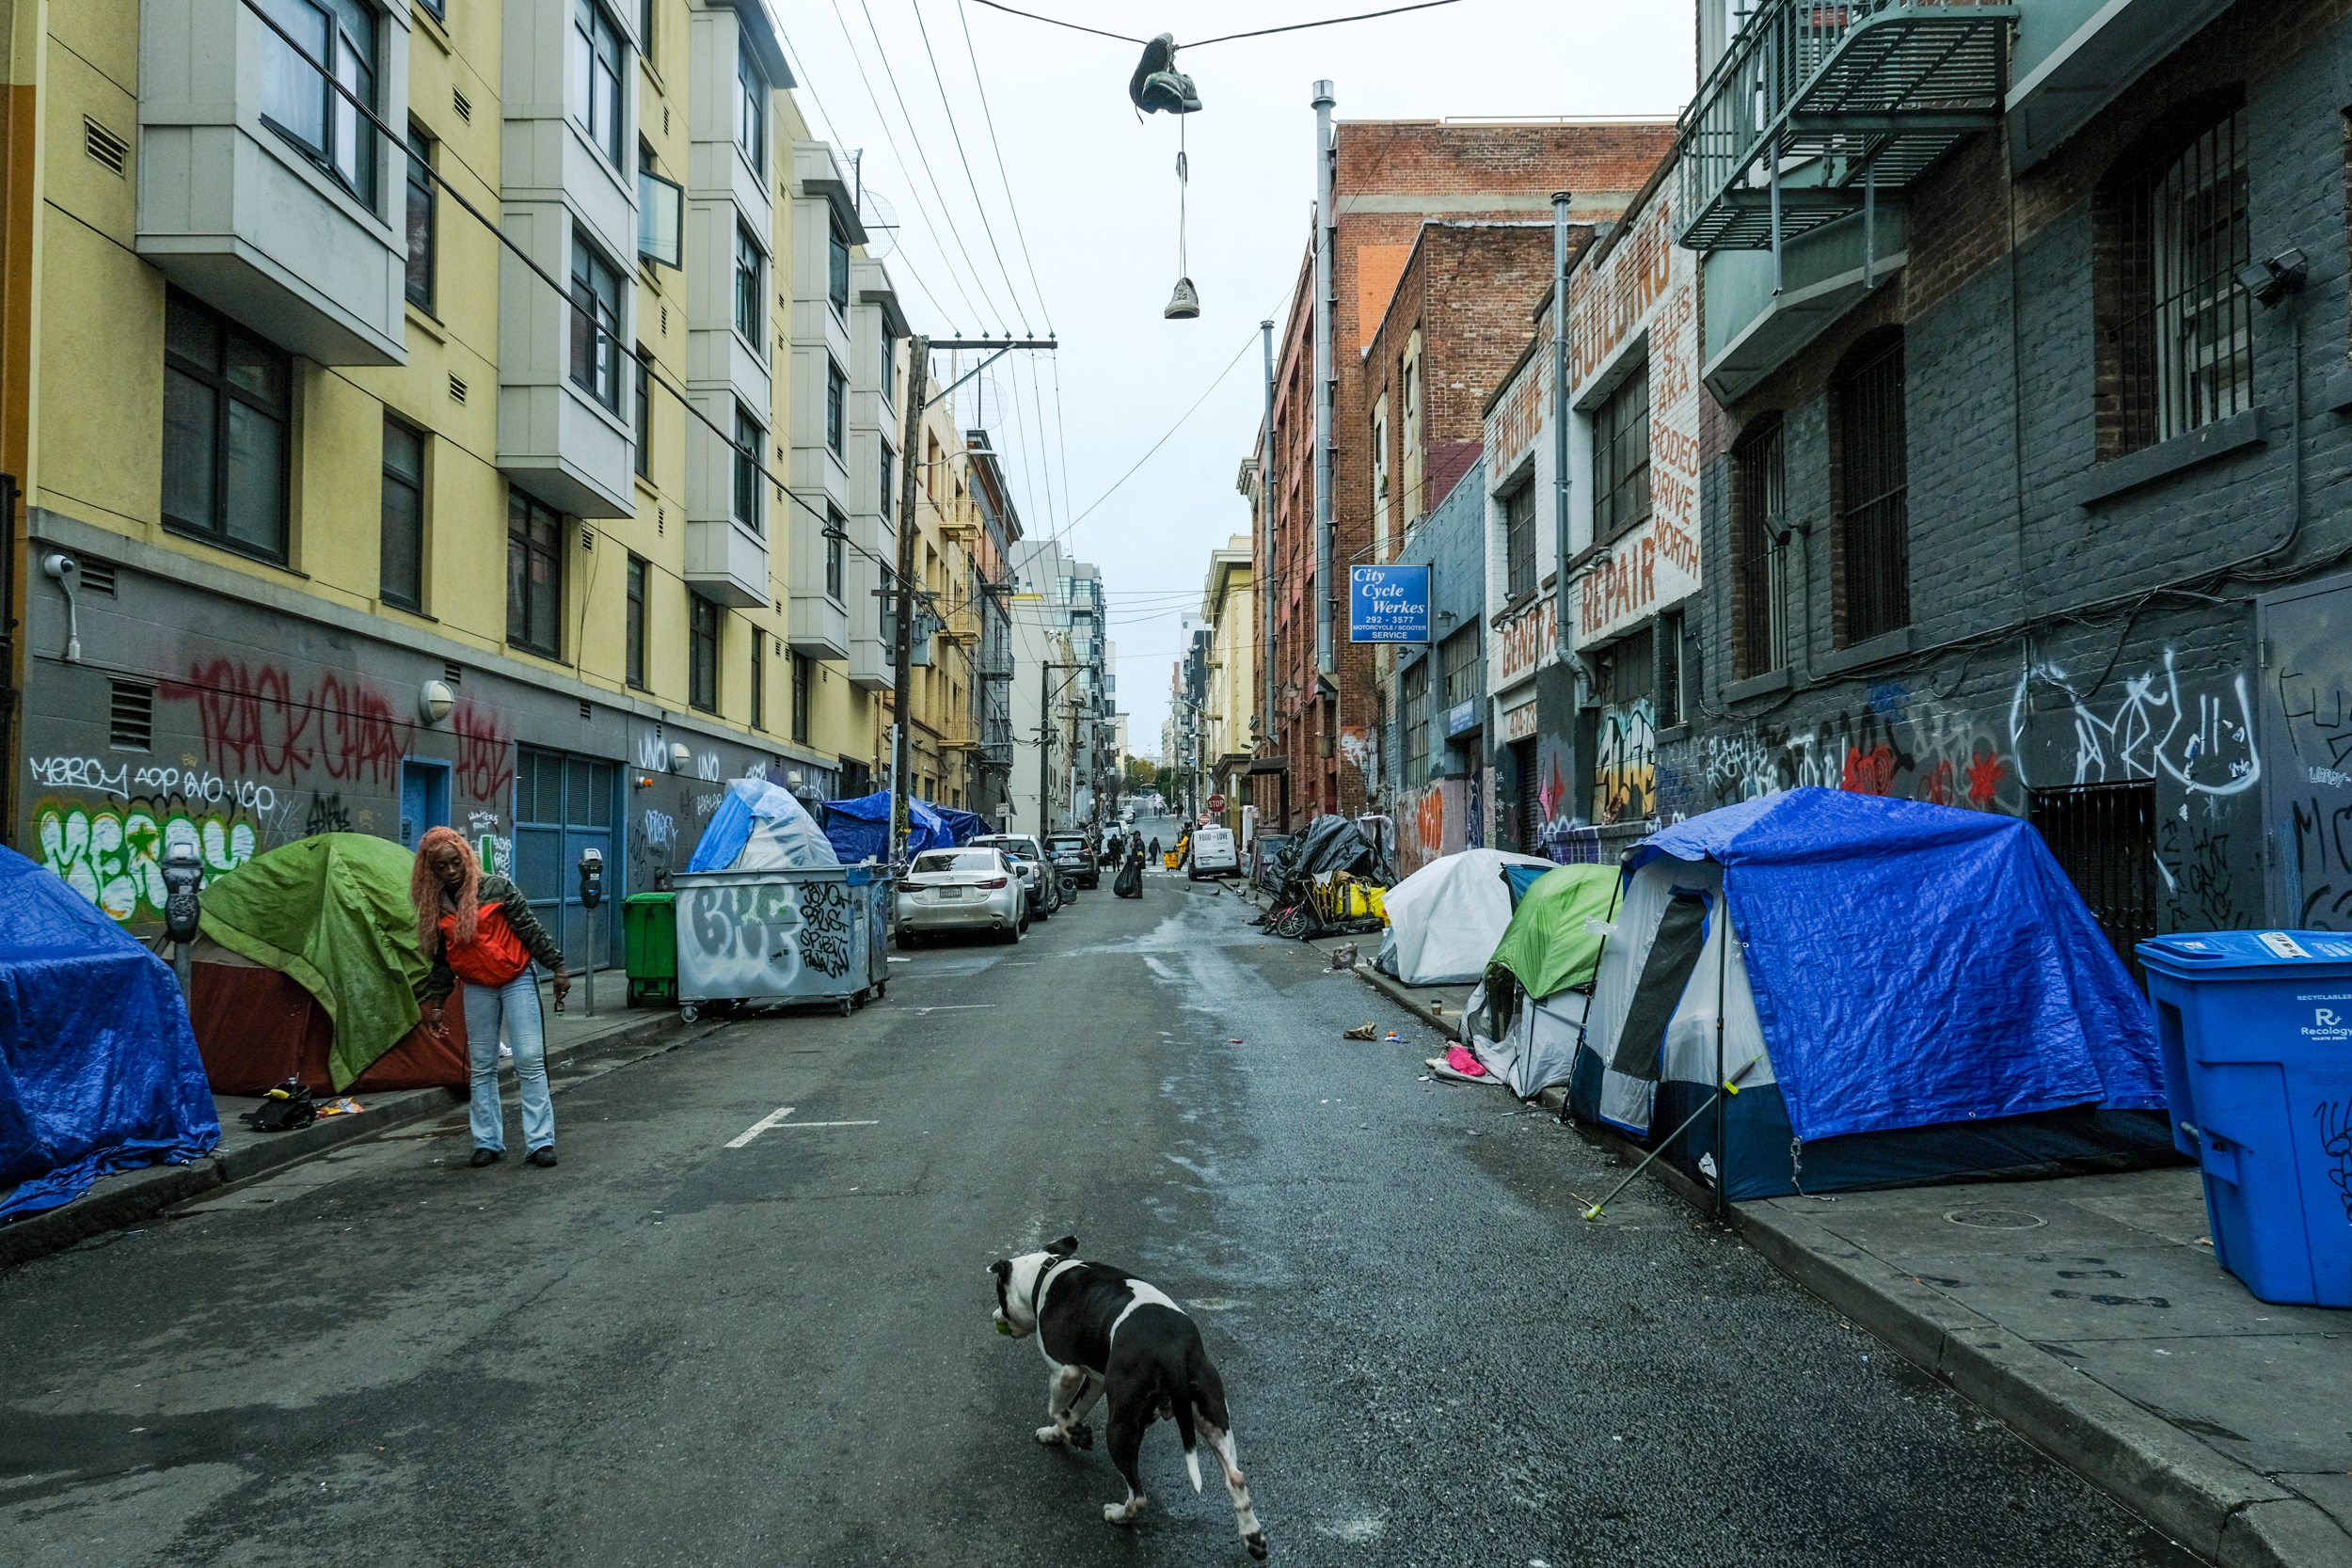 An alley in the Tenderloin with tents, graffiti, a person and a dog in a homeless encampment.